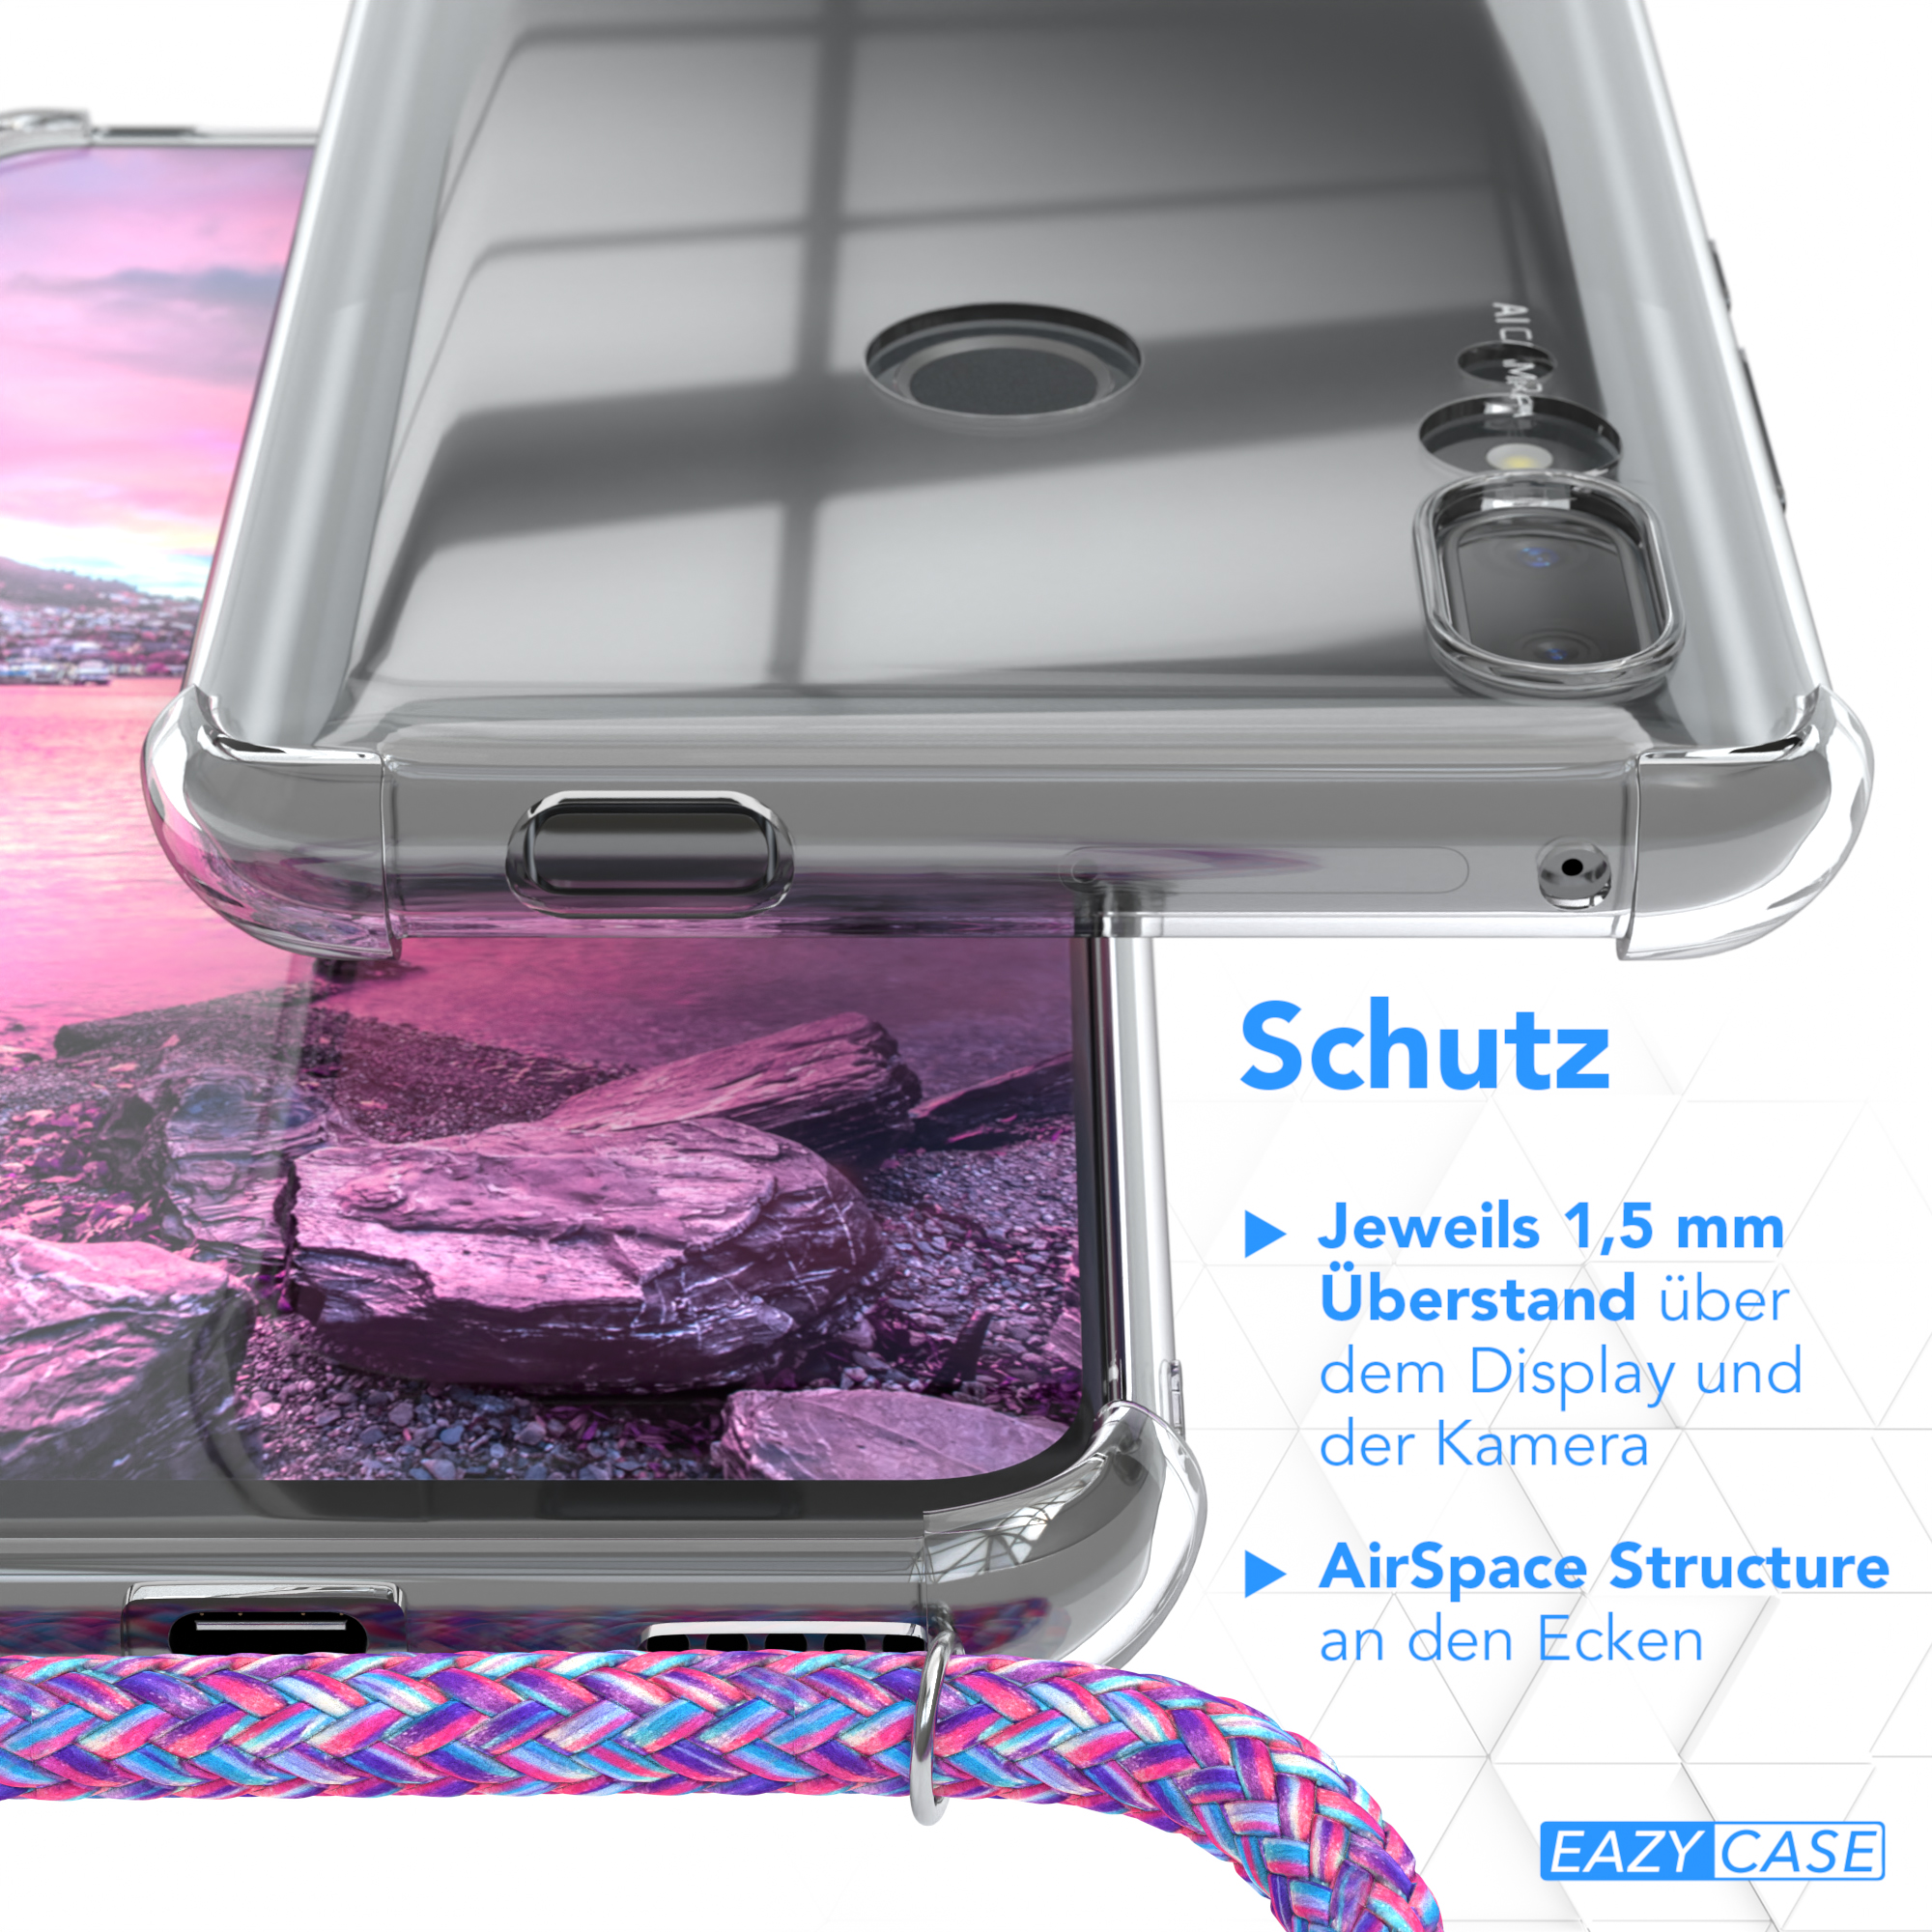 EAZY CASE Umhängetasche, Huawei, / Z Clear (2019), Silber Umhängeband, Prime Cover Y9 Smart Lila P Clips mit 